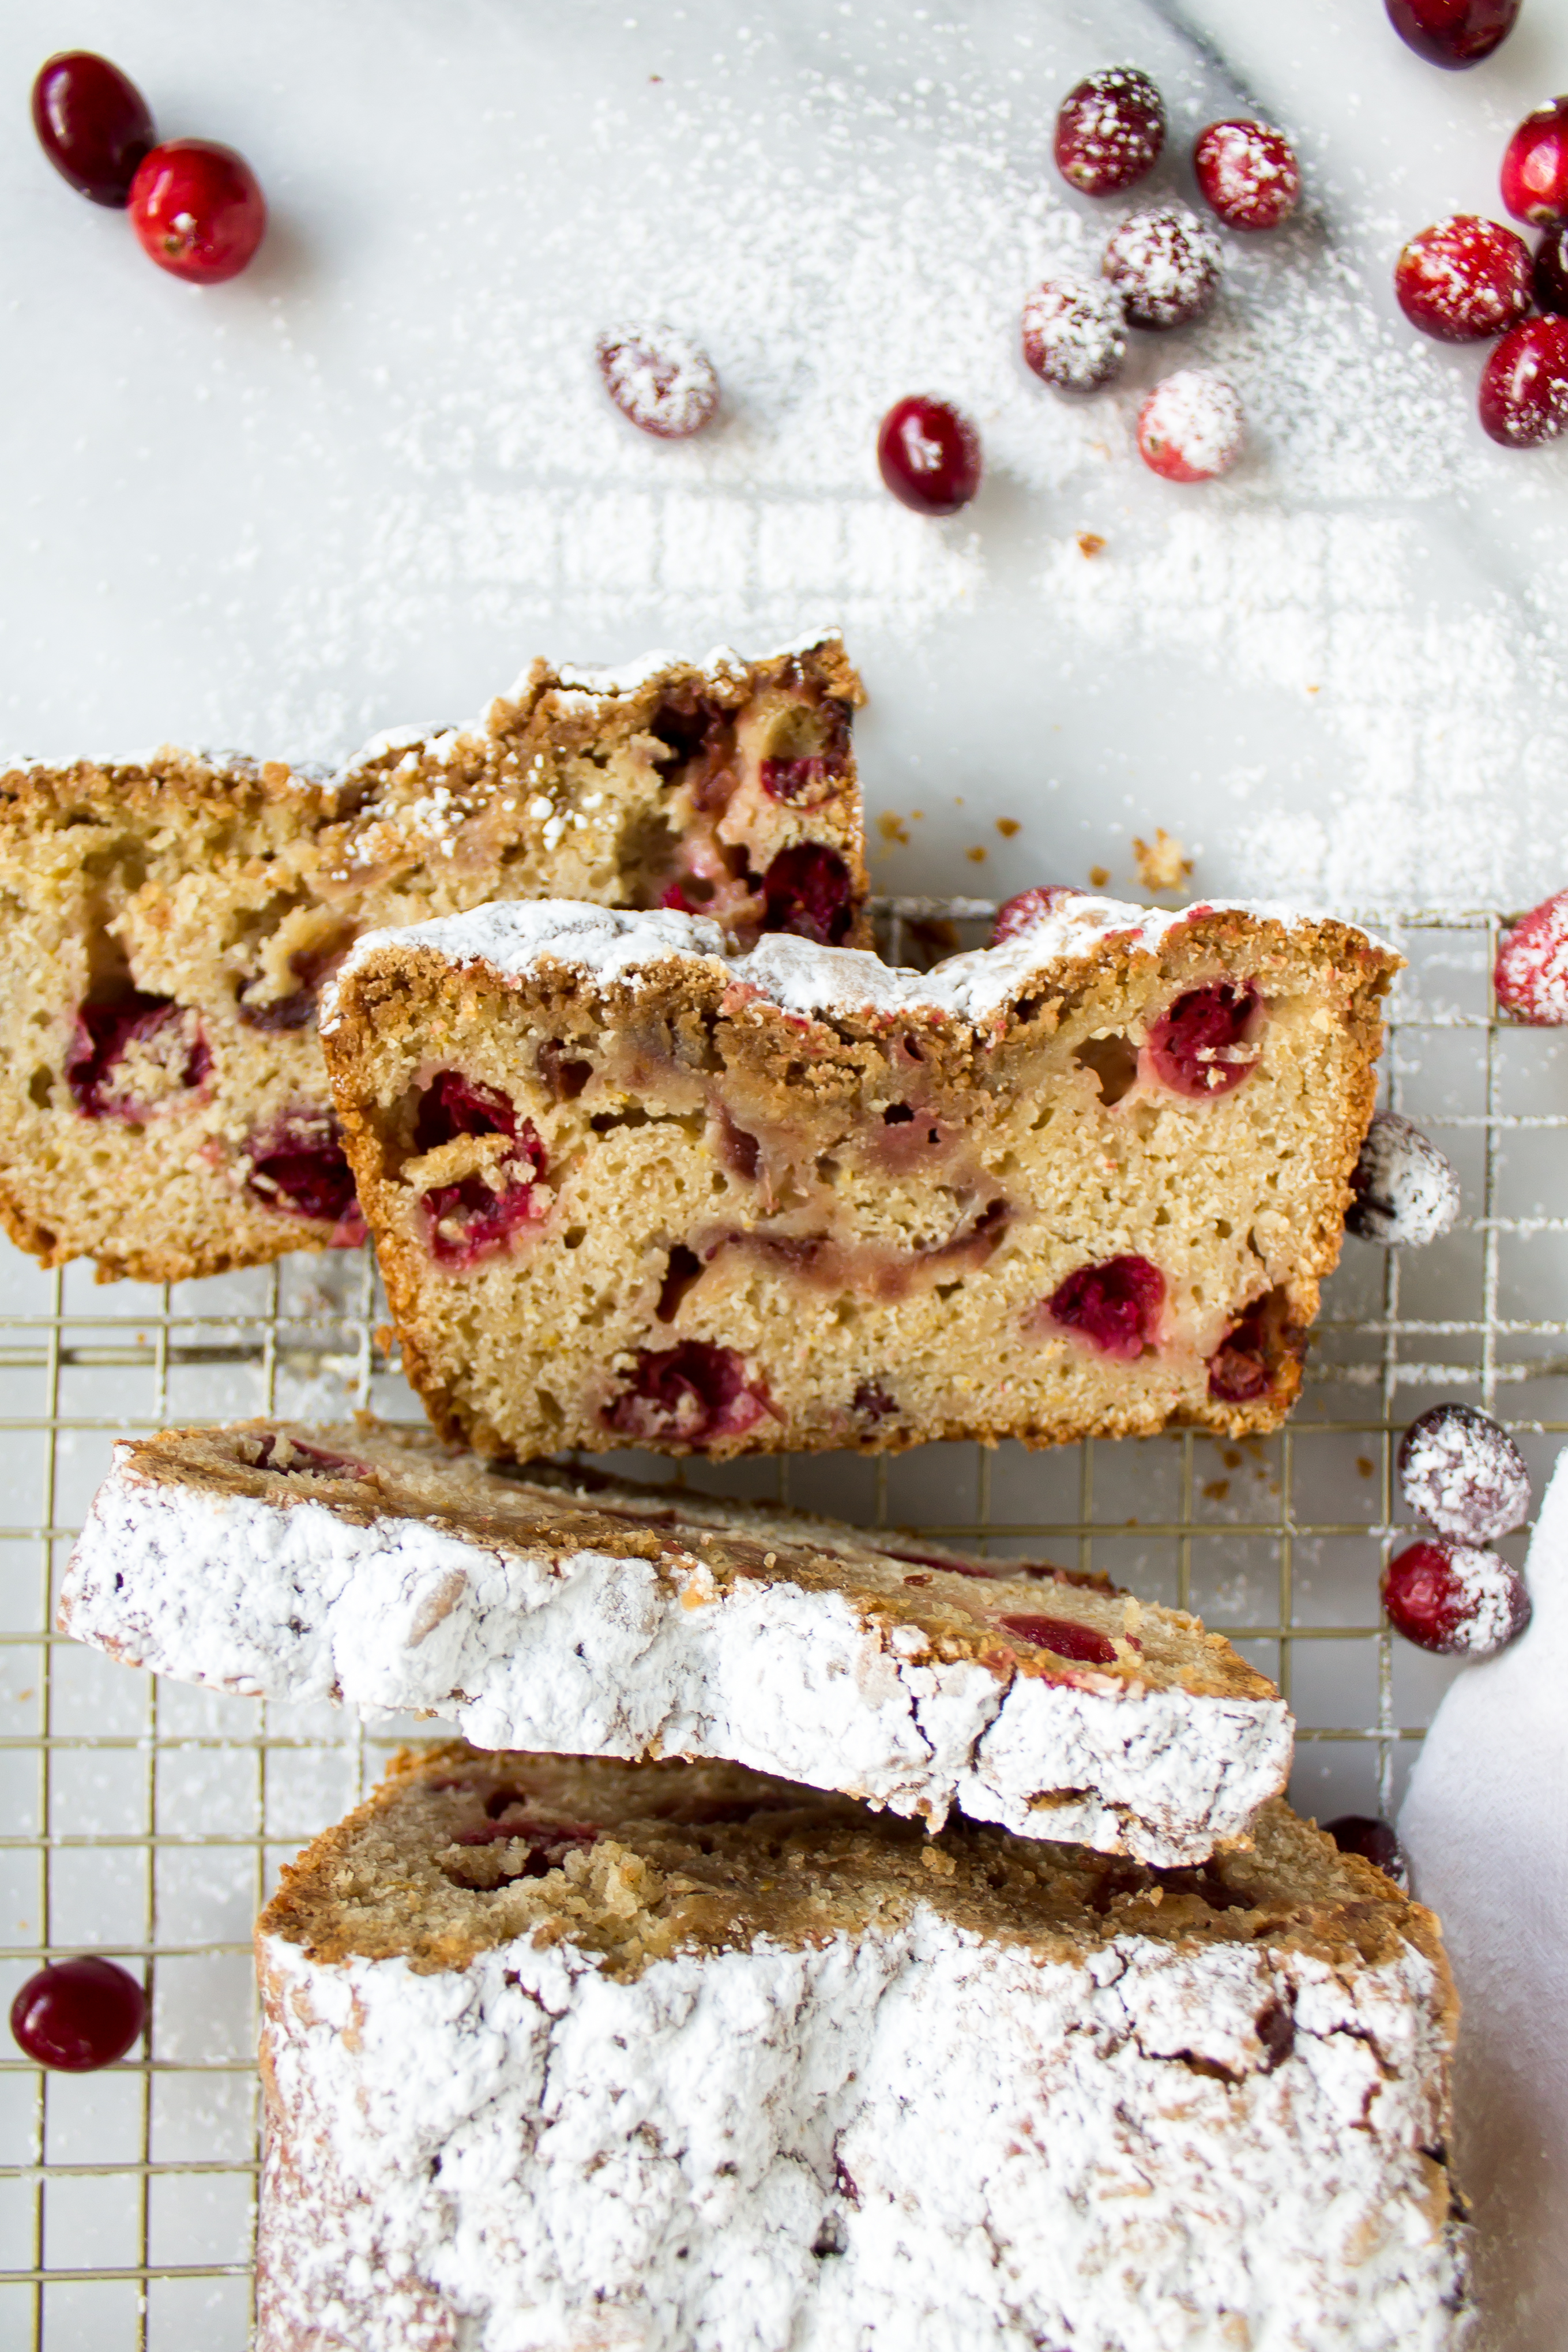 Cranberry quick bread is the perfect double duty bread! Make it for breakfast on Thanksgiving morning or use your leftover cranberry sauce to make a loaf for post-Thanksgiving enjoyment. | www.passthecookies.com